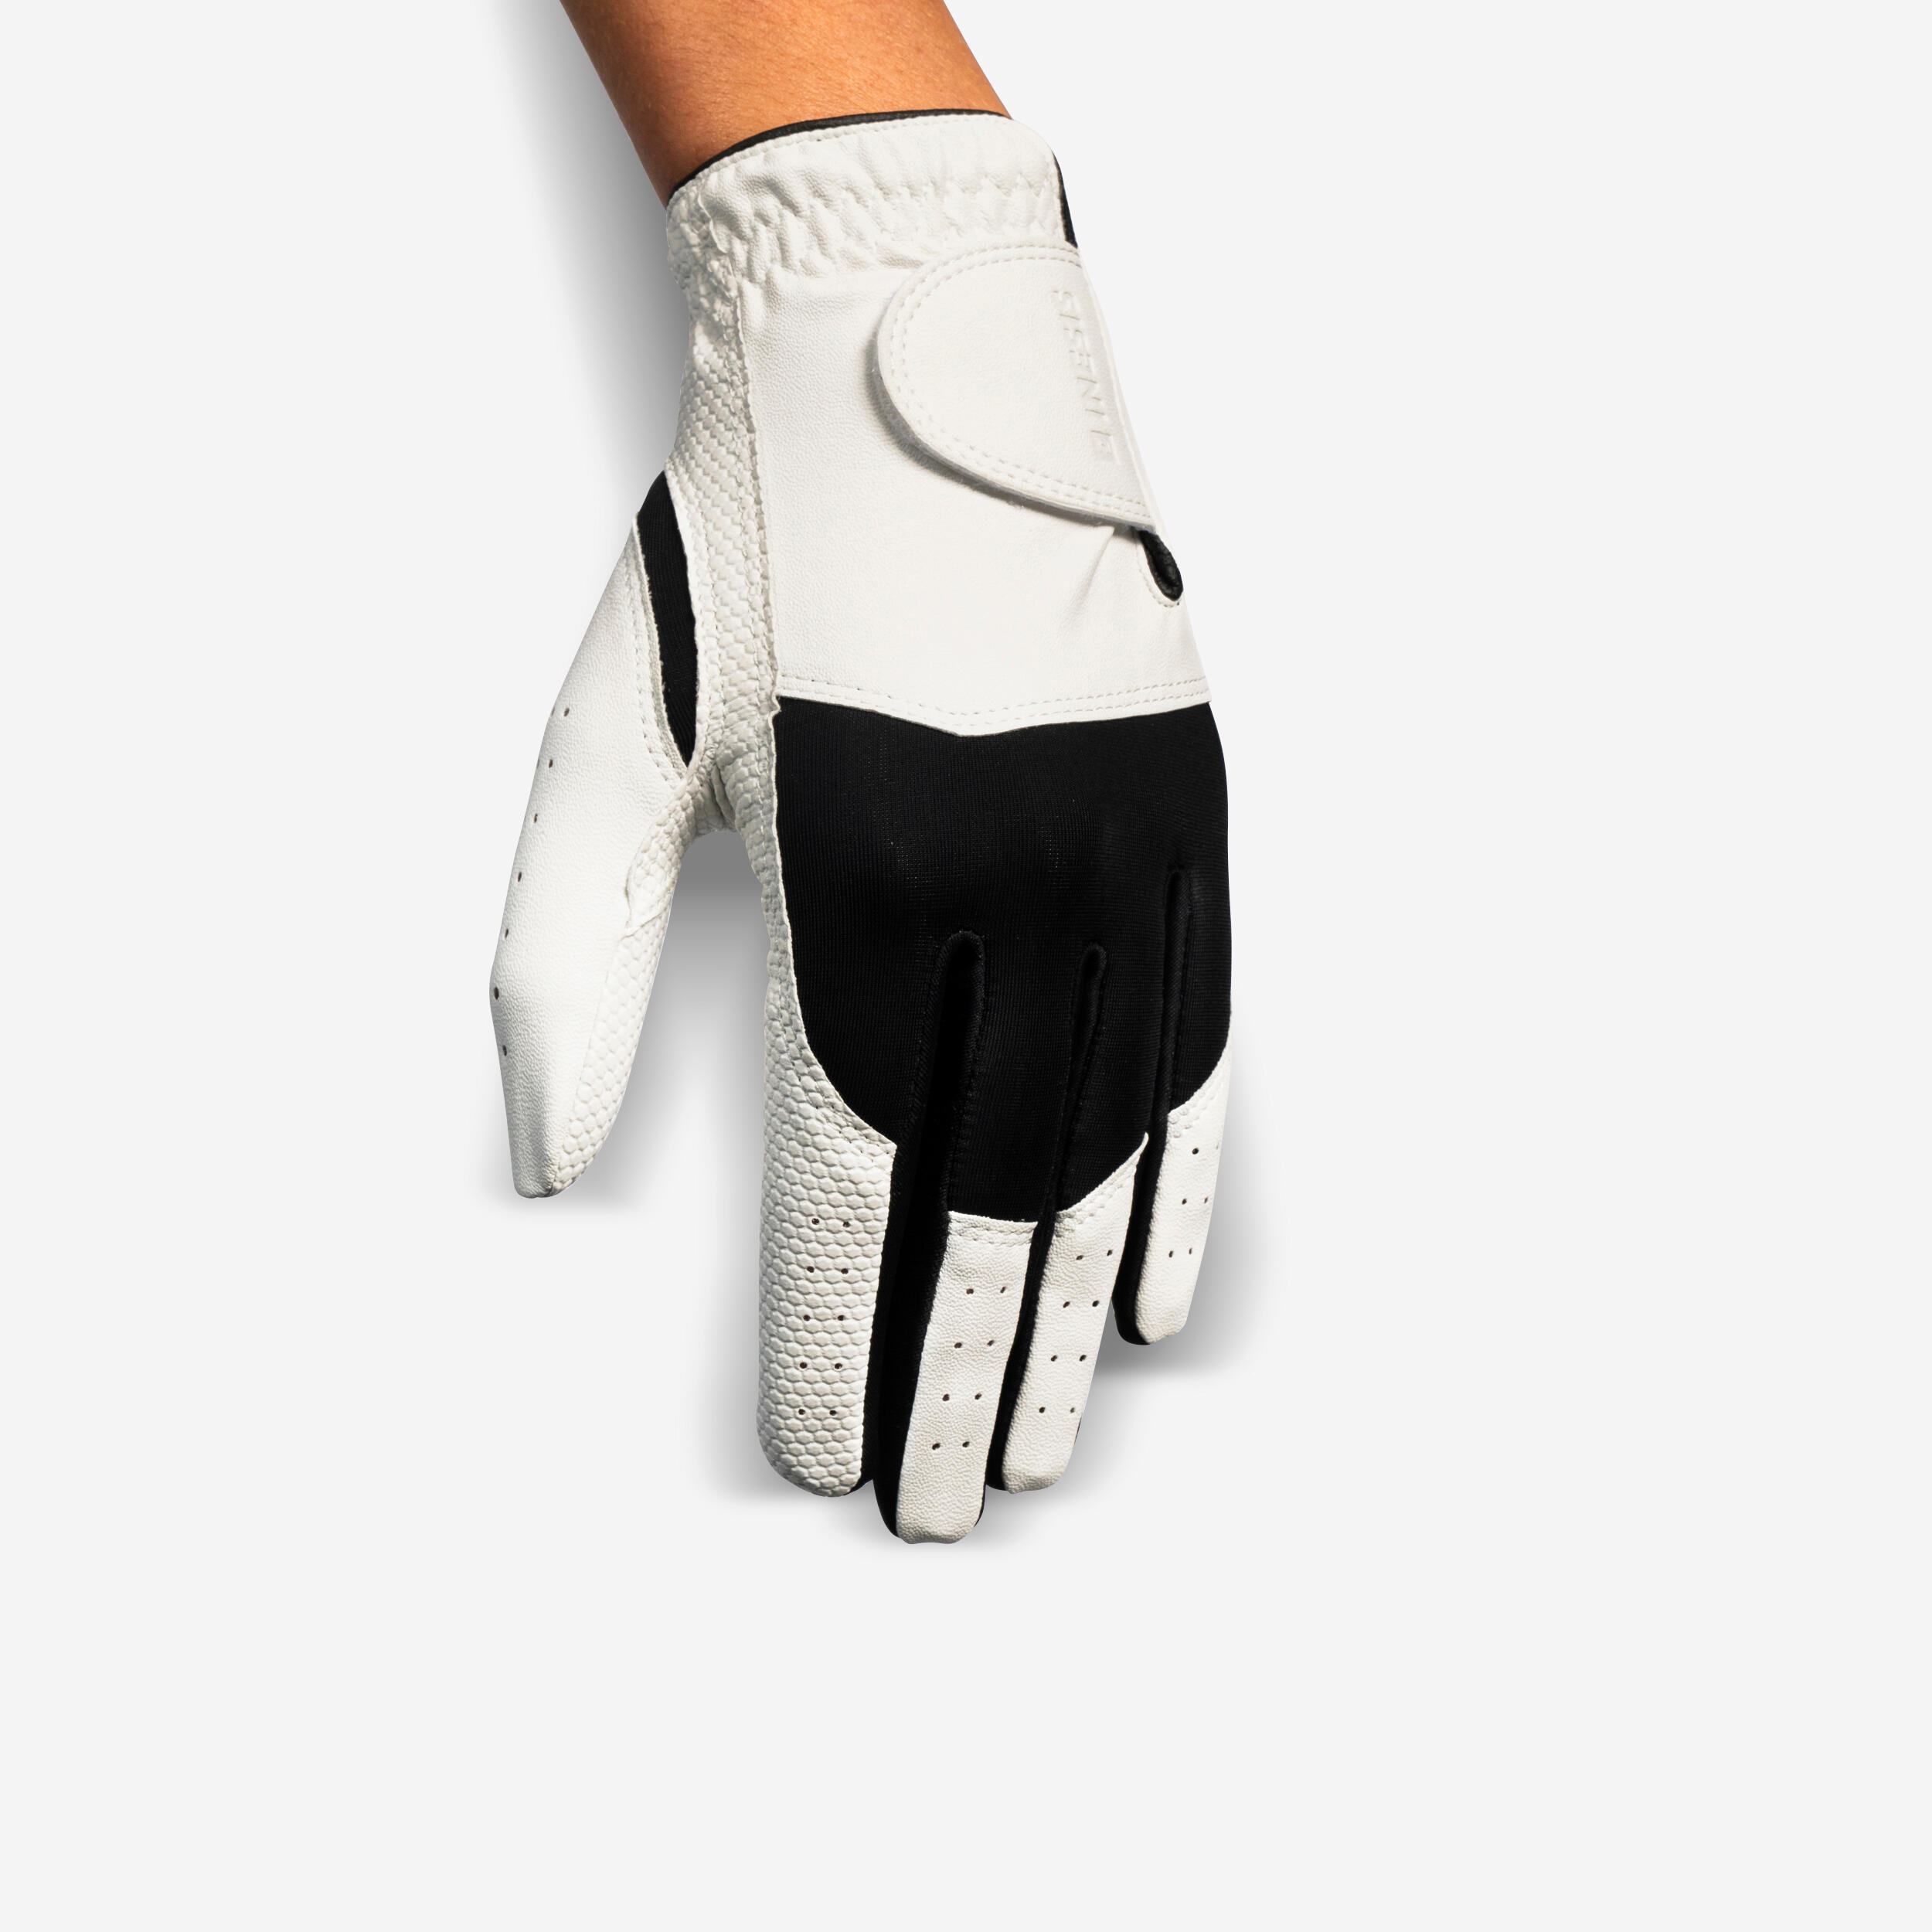 INESIS Women's golf resistance glove for Right-Handed players - white and black